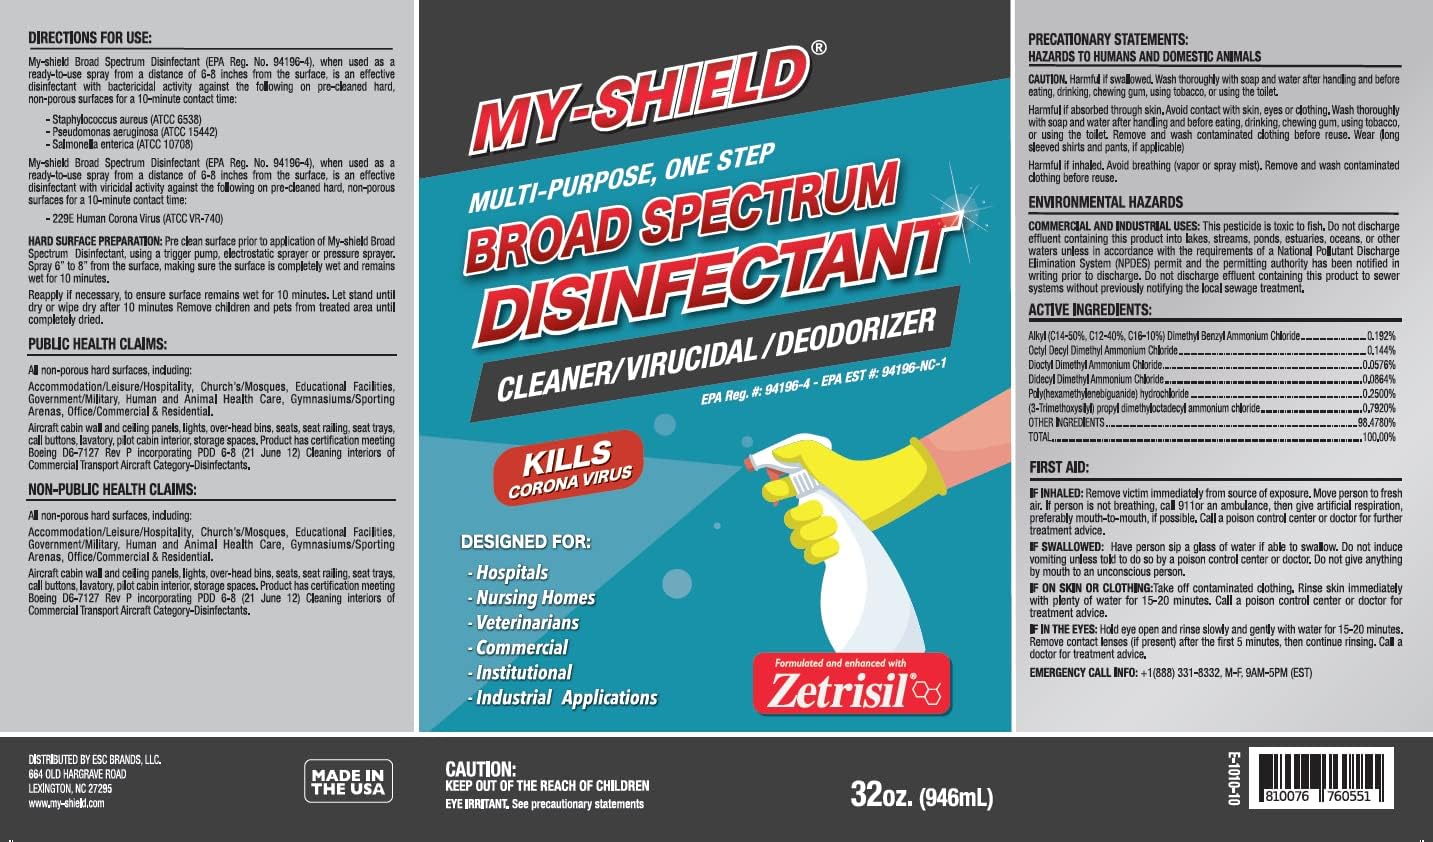 My-Shield® Broad Spectrum Disinfectant